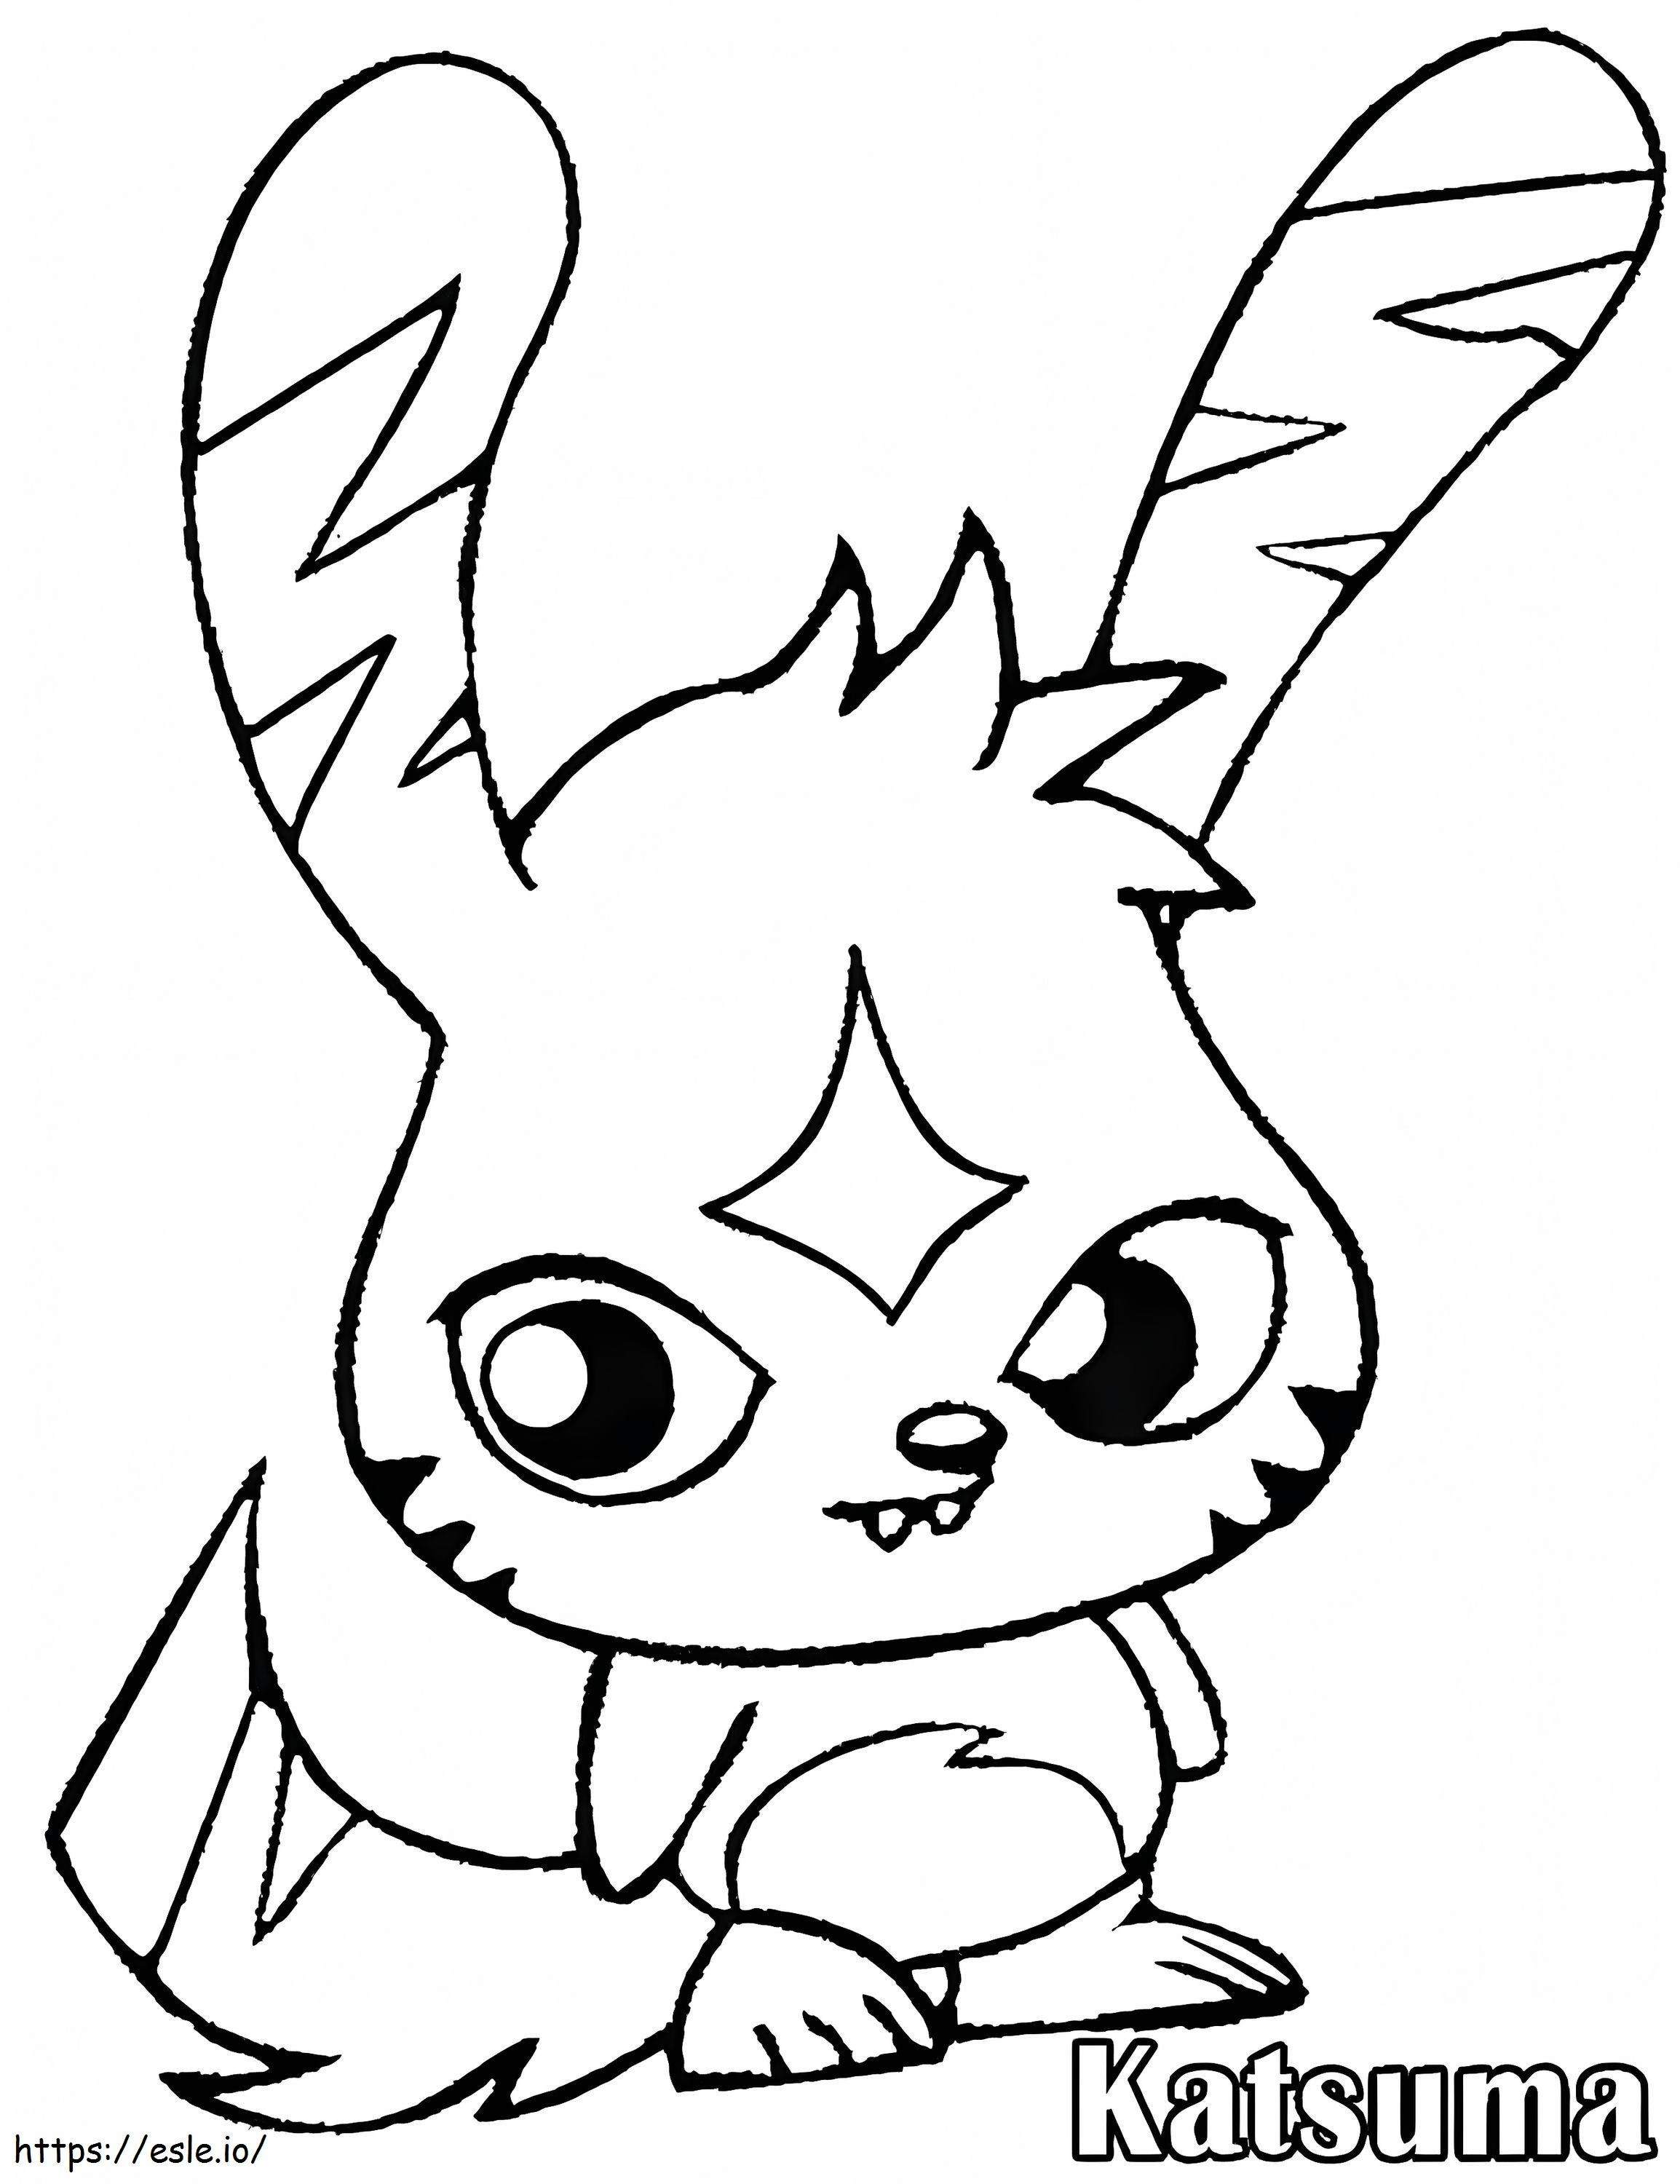 Try Moshi Monsters coloring page